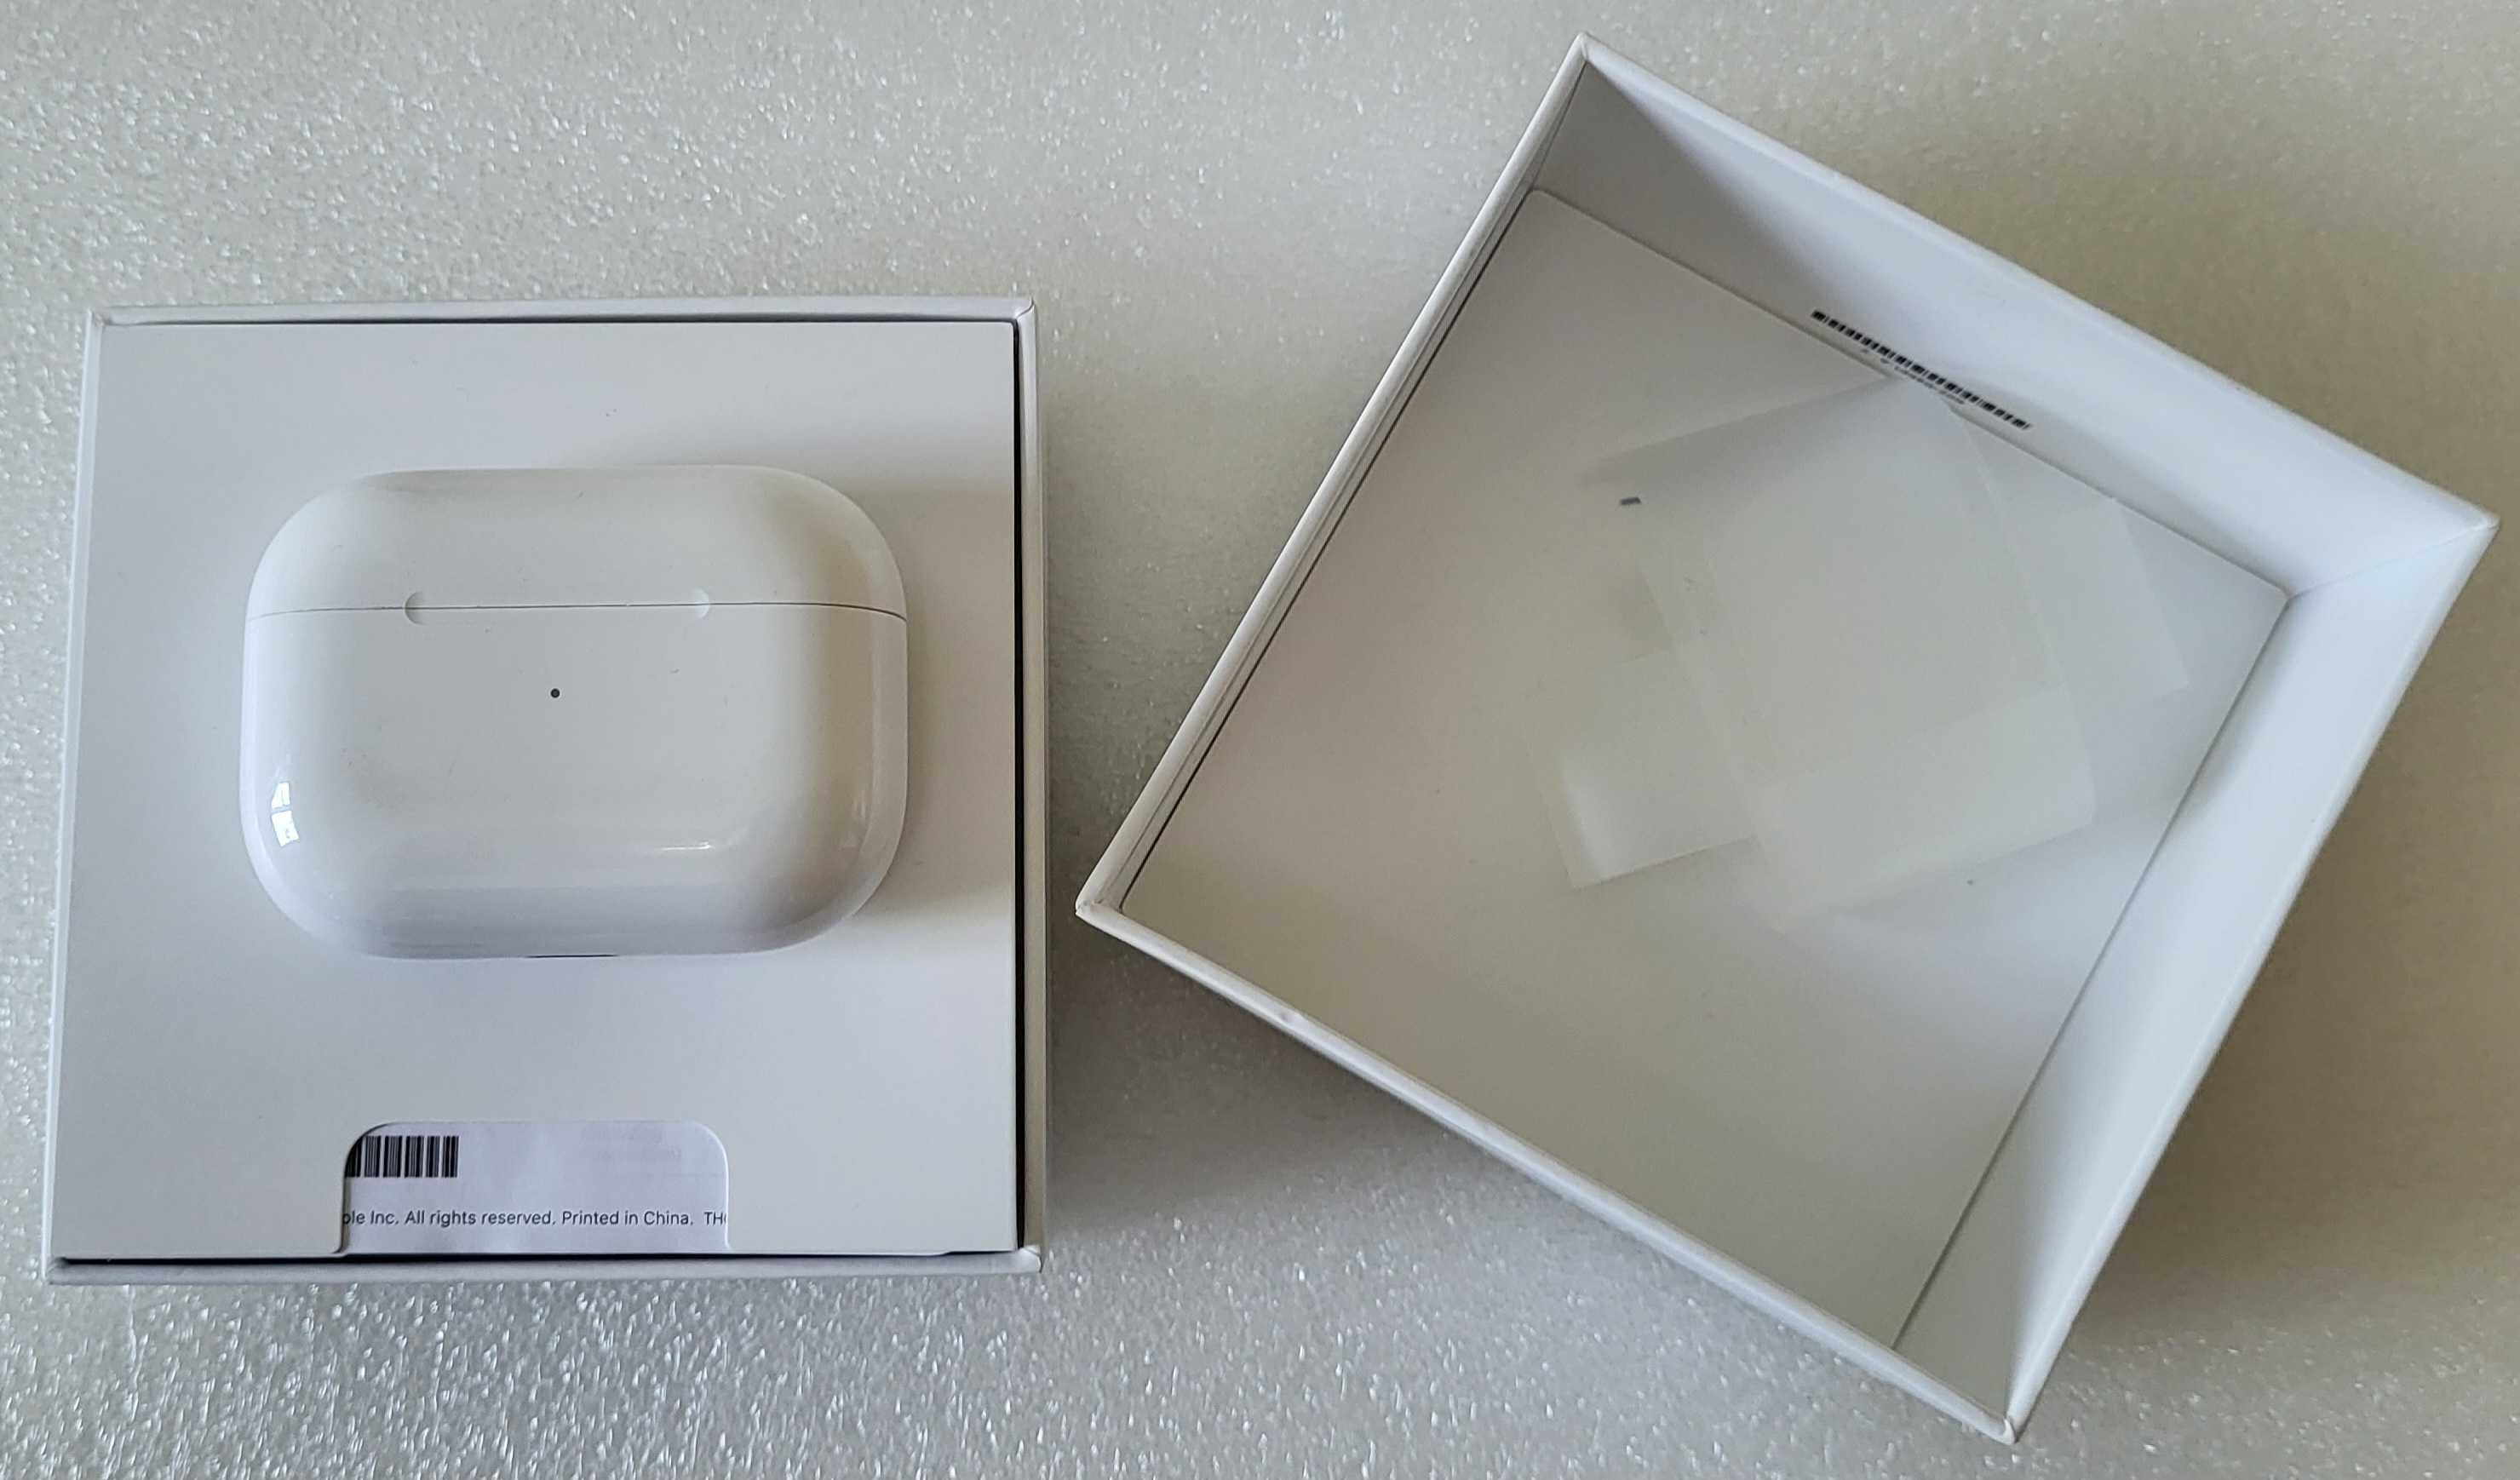 Apple AirPods Pro (1nd gen. with MagSafe Lightning Charging Case)